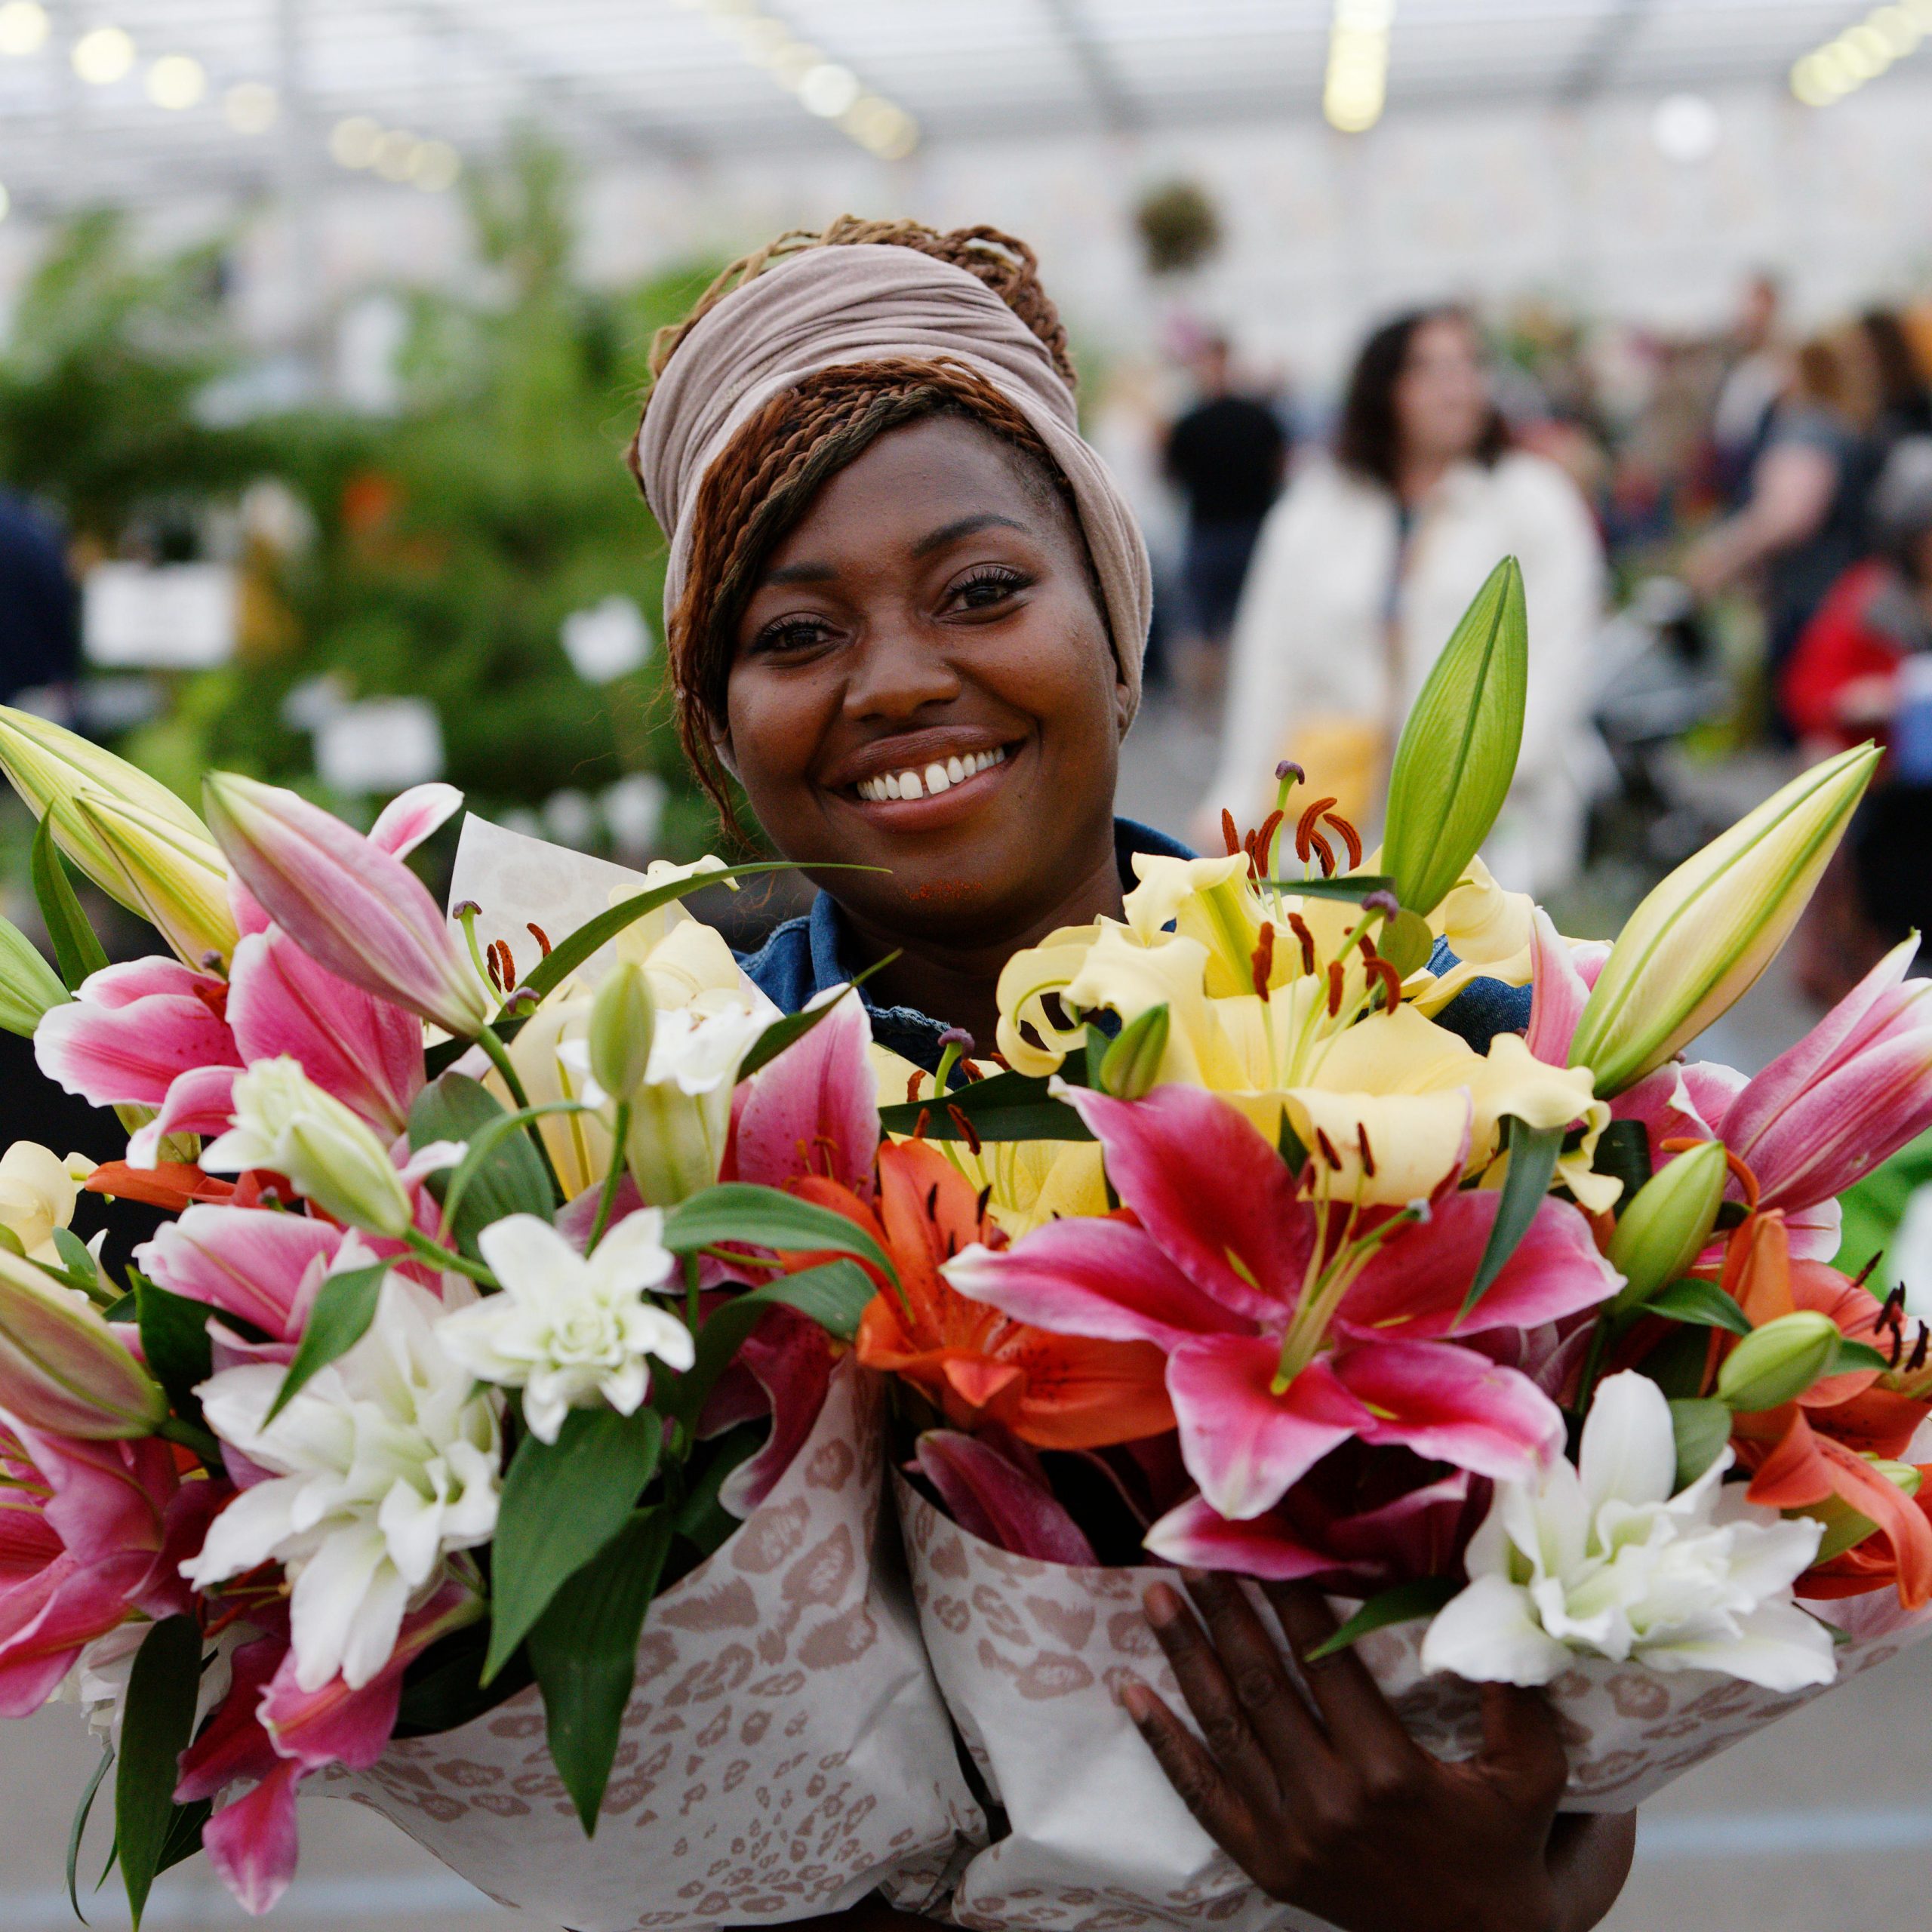 Lady carrying two bouquets of flowers at BBC Gardeners' World Live